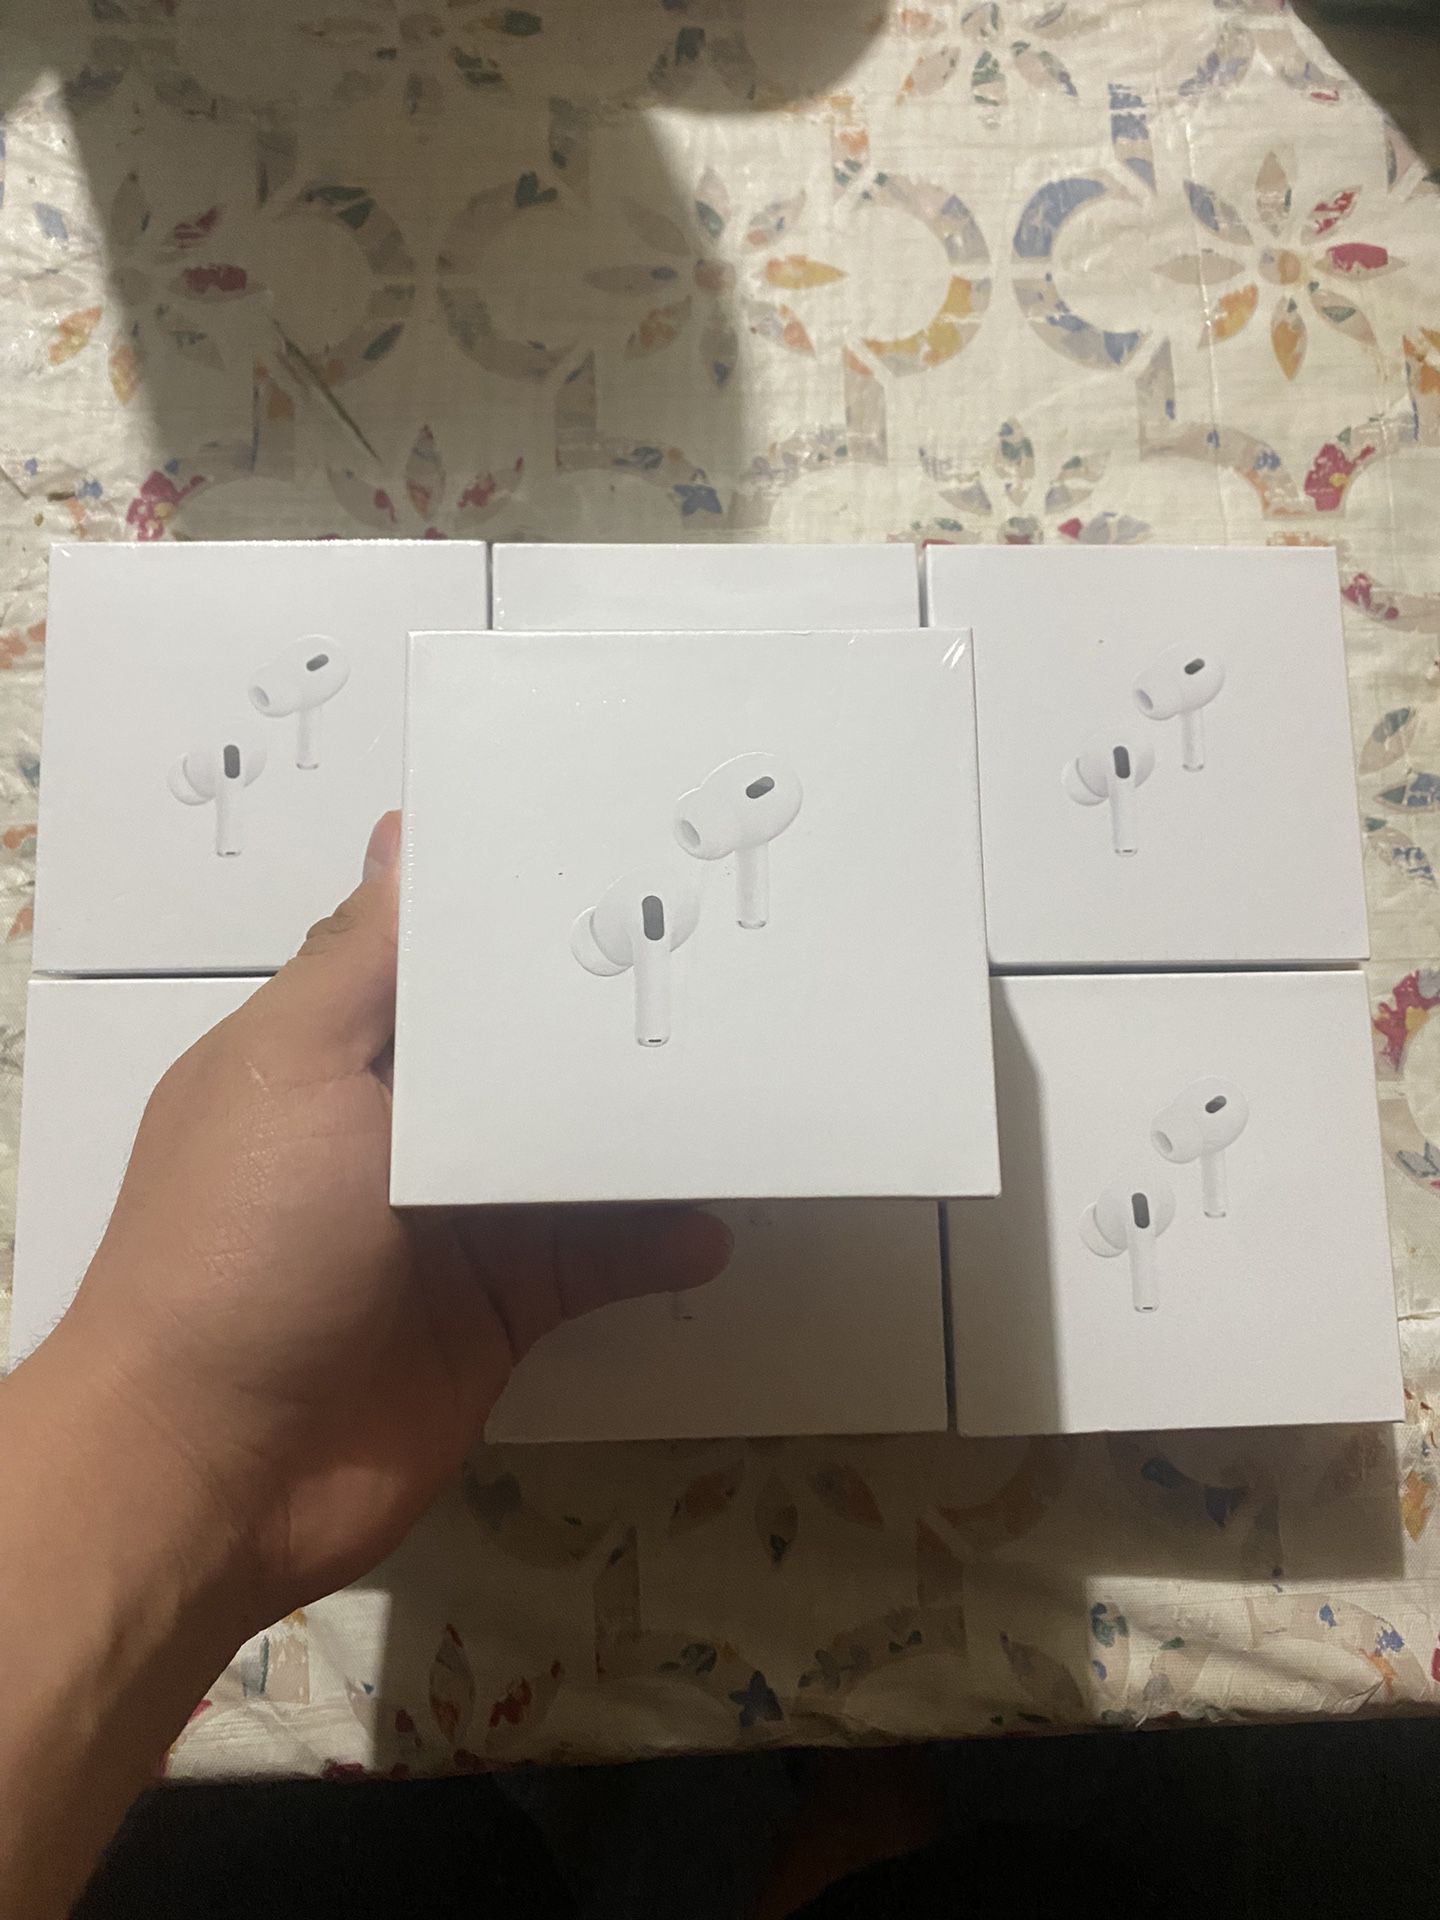 Apple AirPods Pro Gen 2 (sealed In Box)